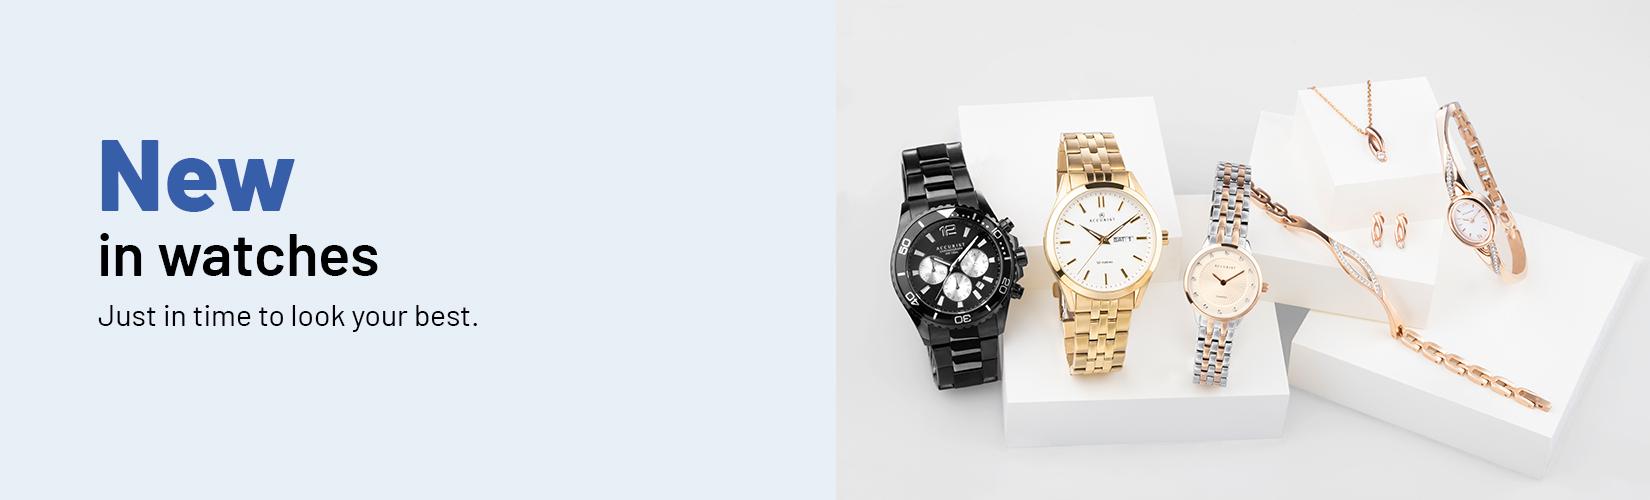 New in watches. Just in time to look your best.